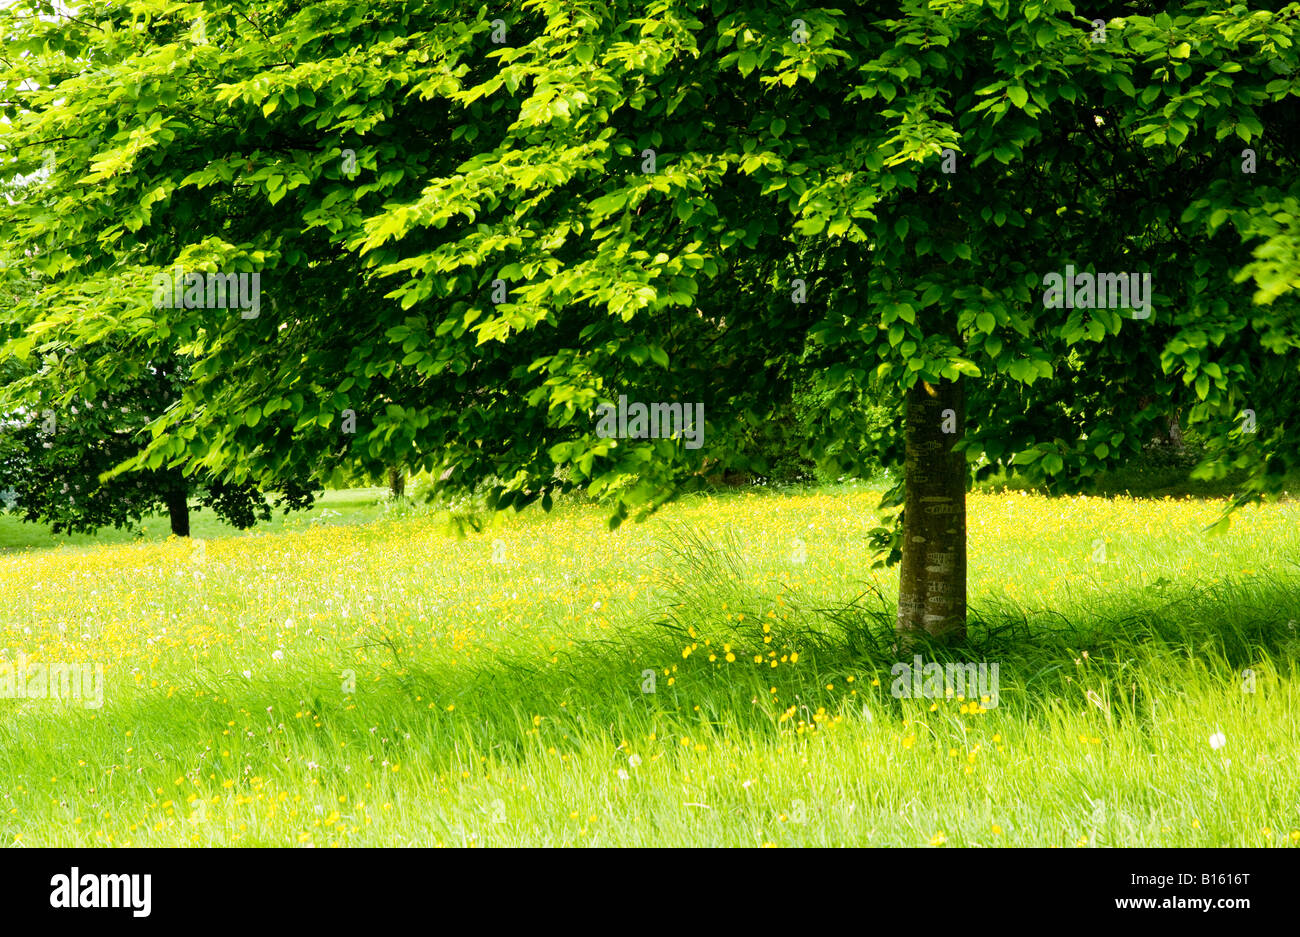 Tree in full summer leaf standing in a grassy meadow full of yellow buttercups at Coate Water Country Park, Wiltshire, England Stock Photo